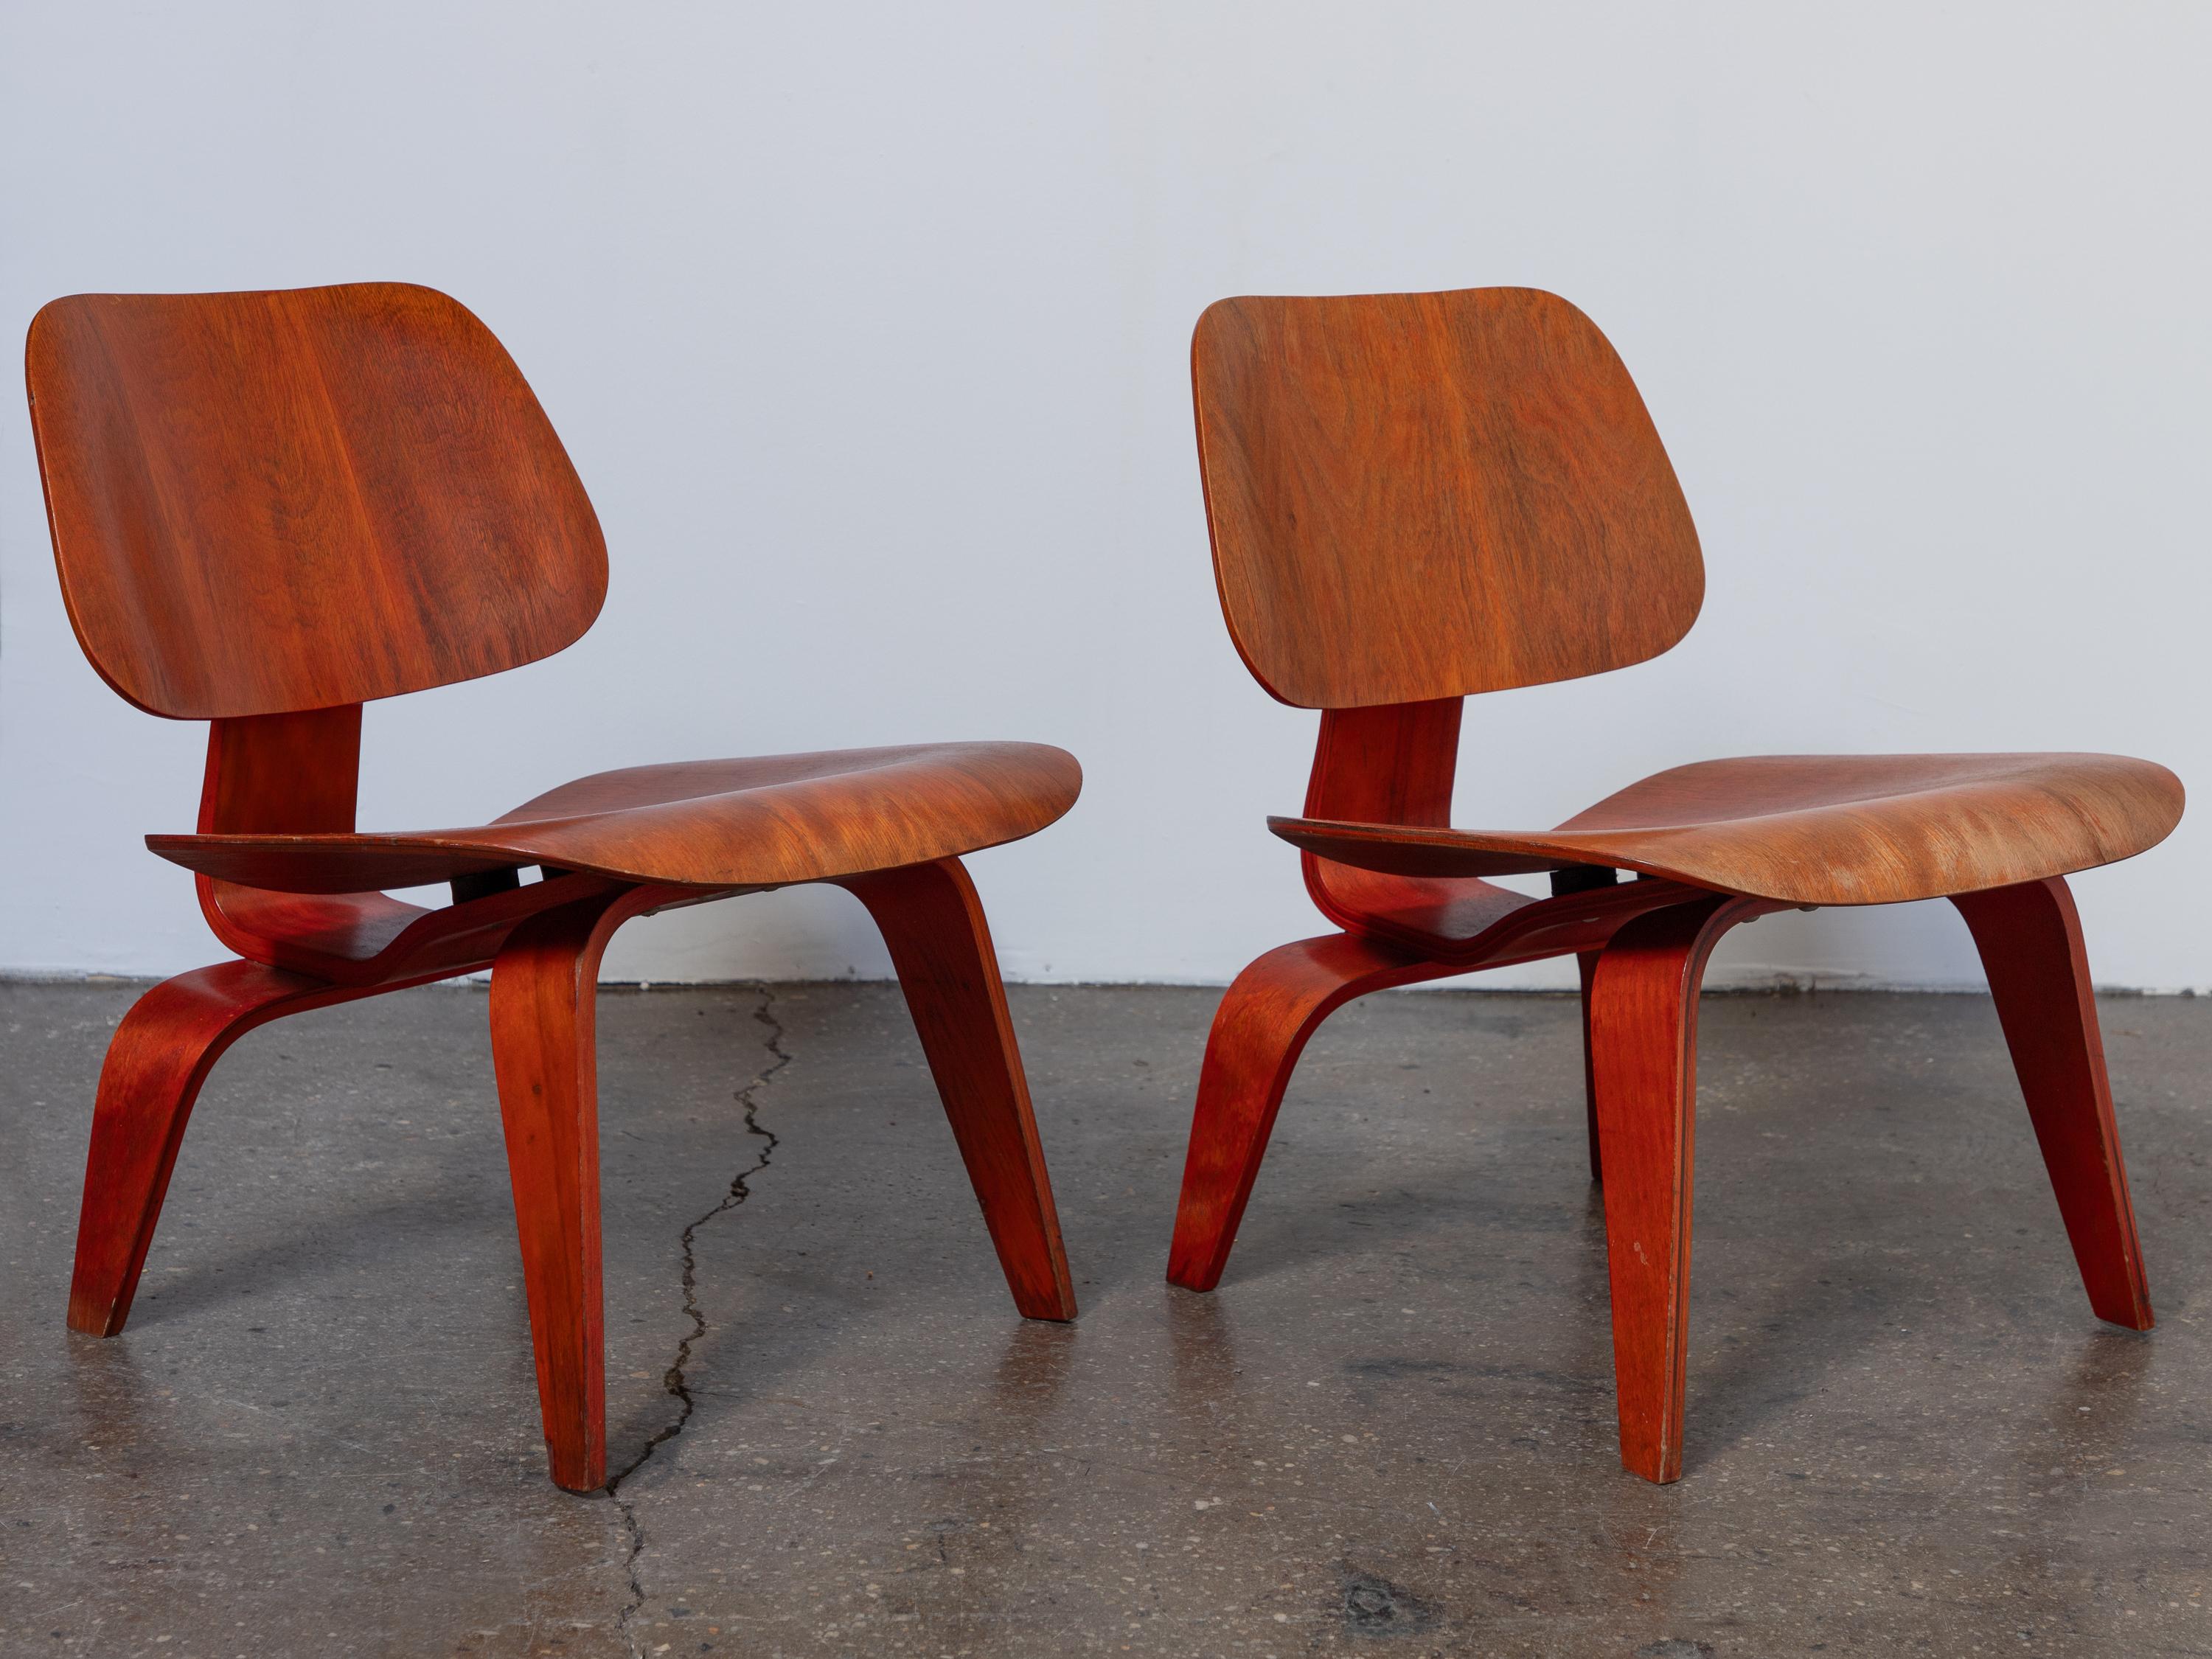 American Eames Evans Red Aniline Dye LCW Lounge Chairs - Matched Pair   For Sale